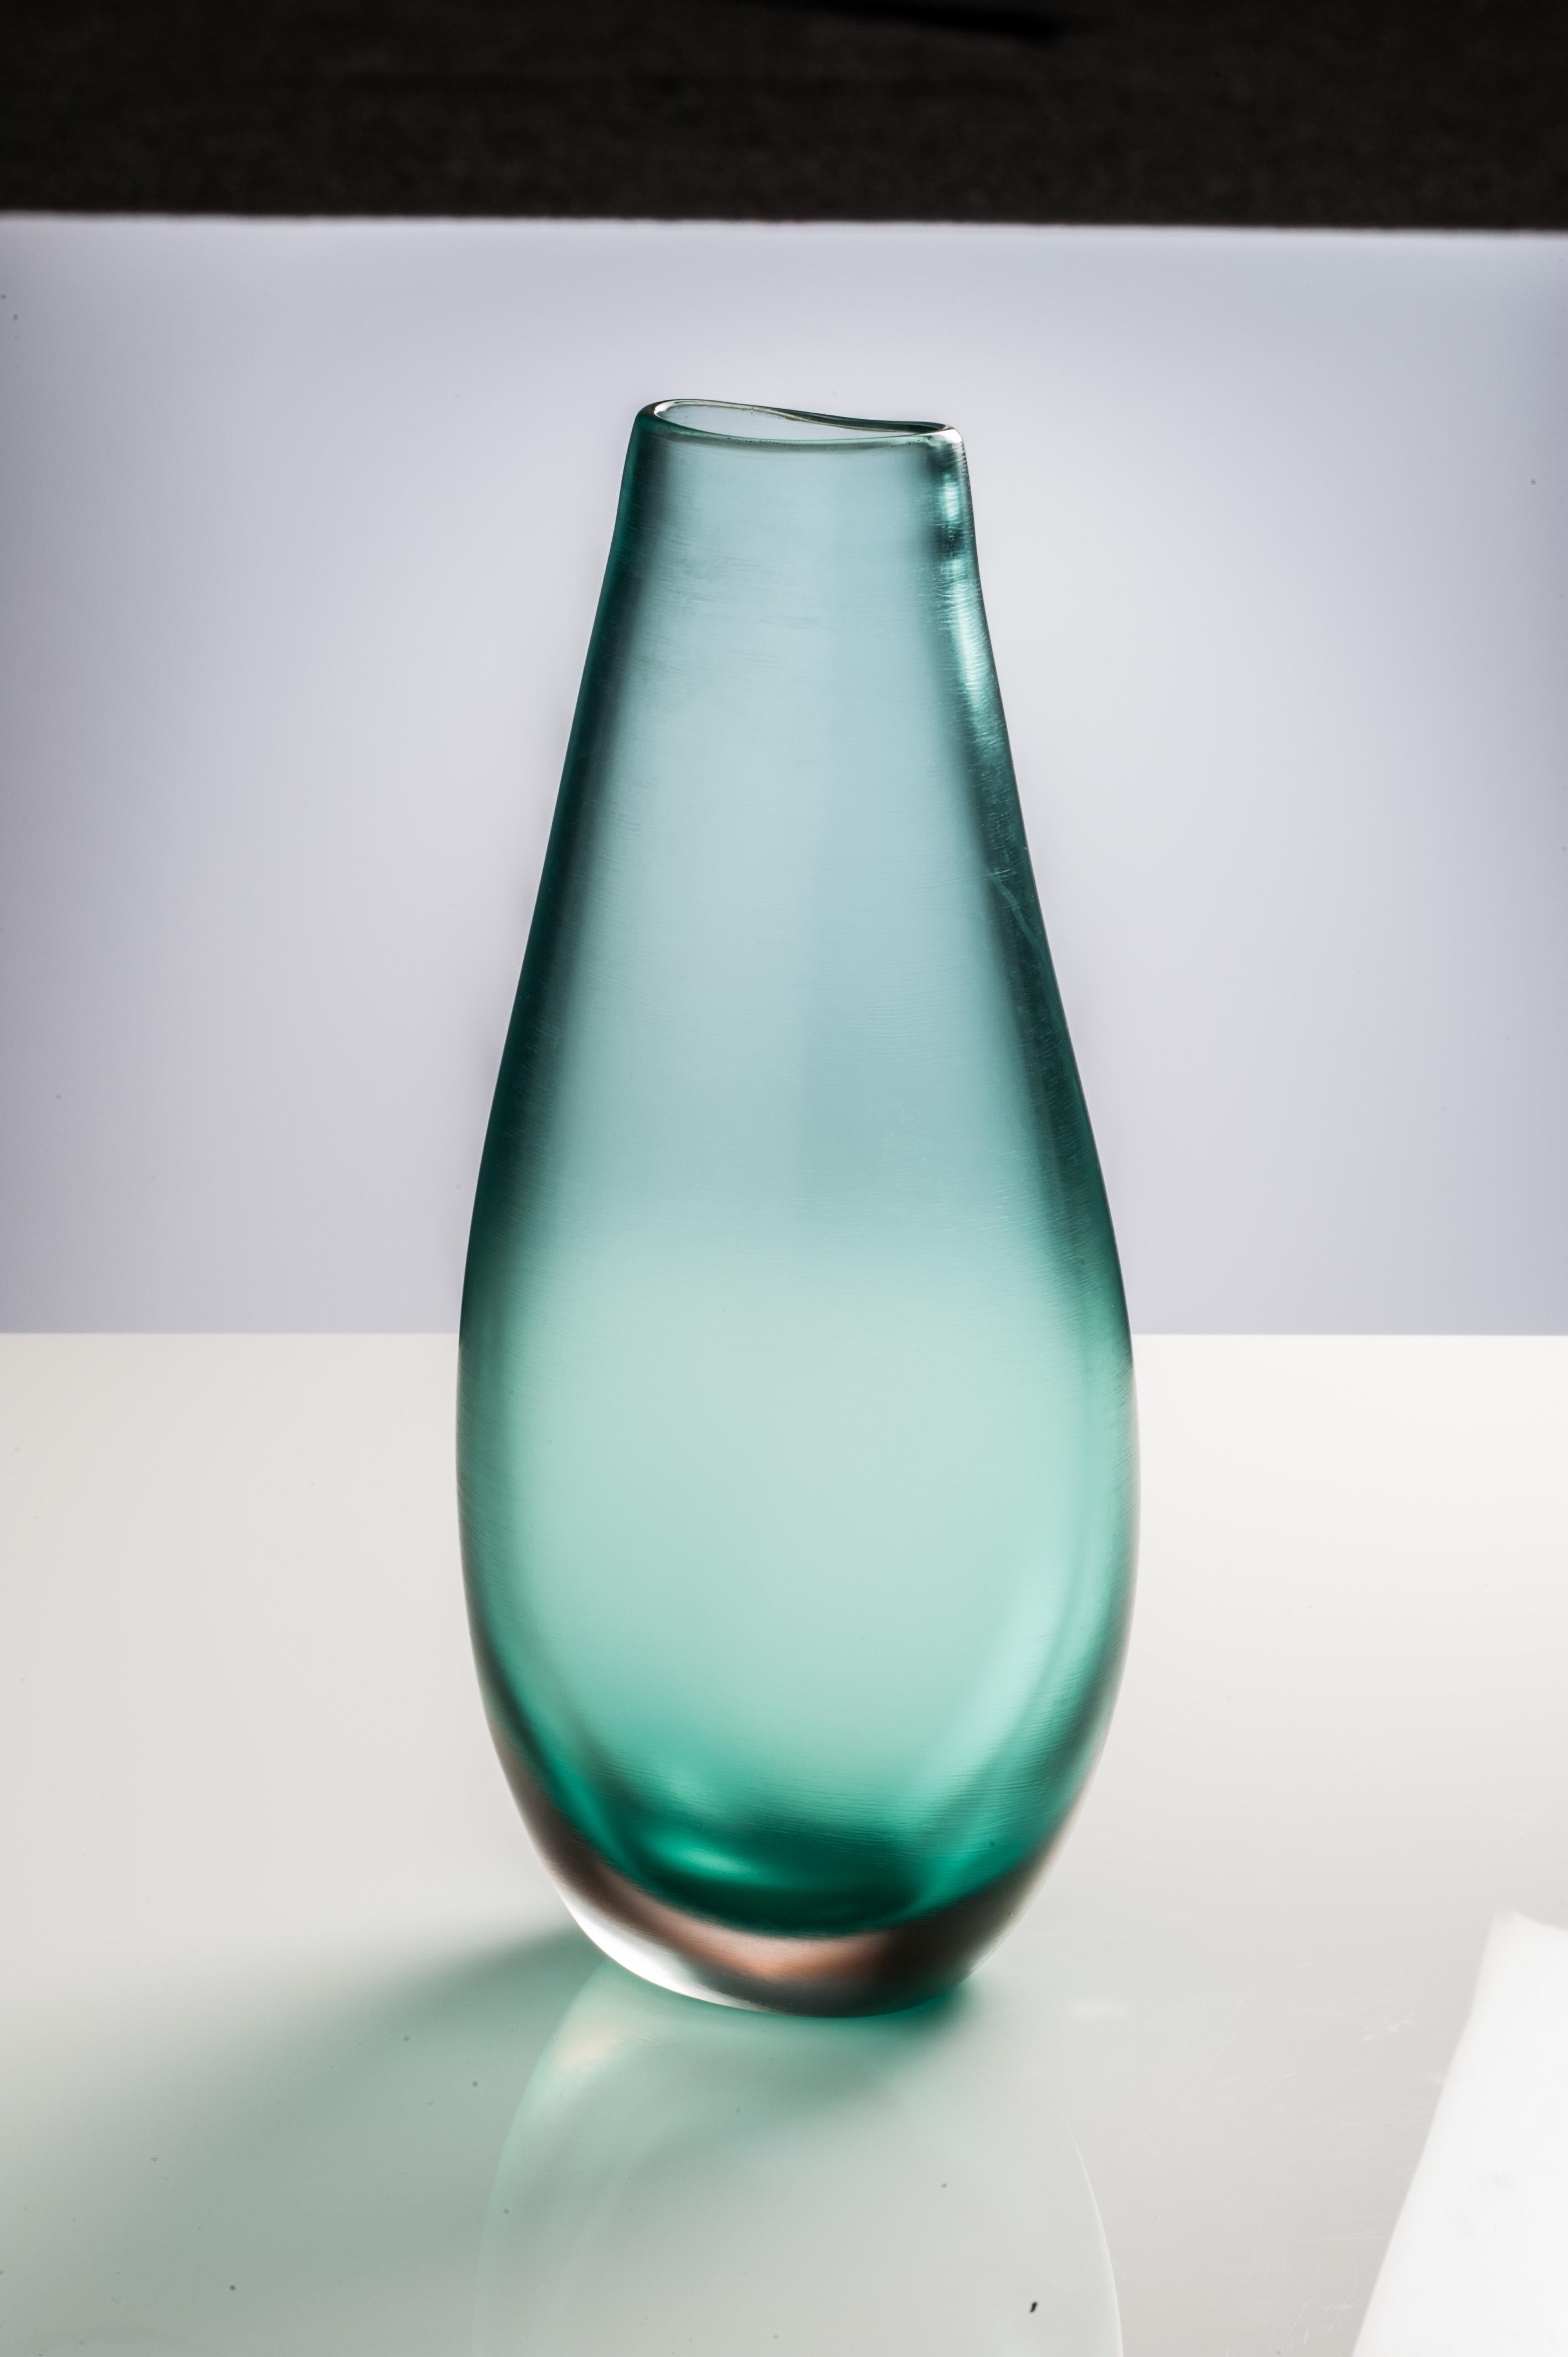 Venini Incisi vase in water by Paolo Venini. Numbered Edition For Year.

Color: Water 
Dimensions: Ø 11 cm, H 32.5 cm
Year of manufacture: 1956
Code: 722.12.